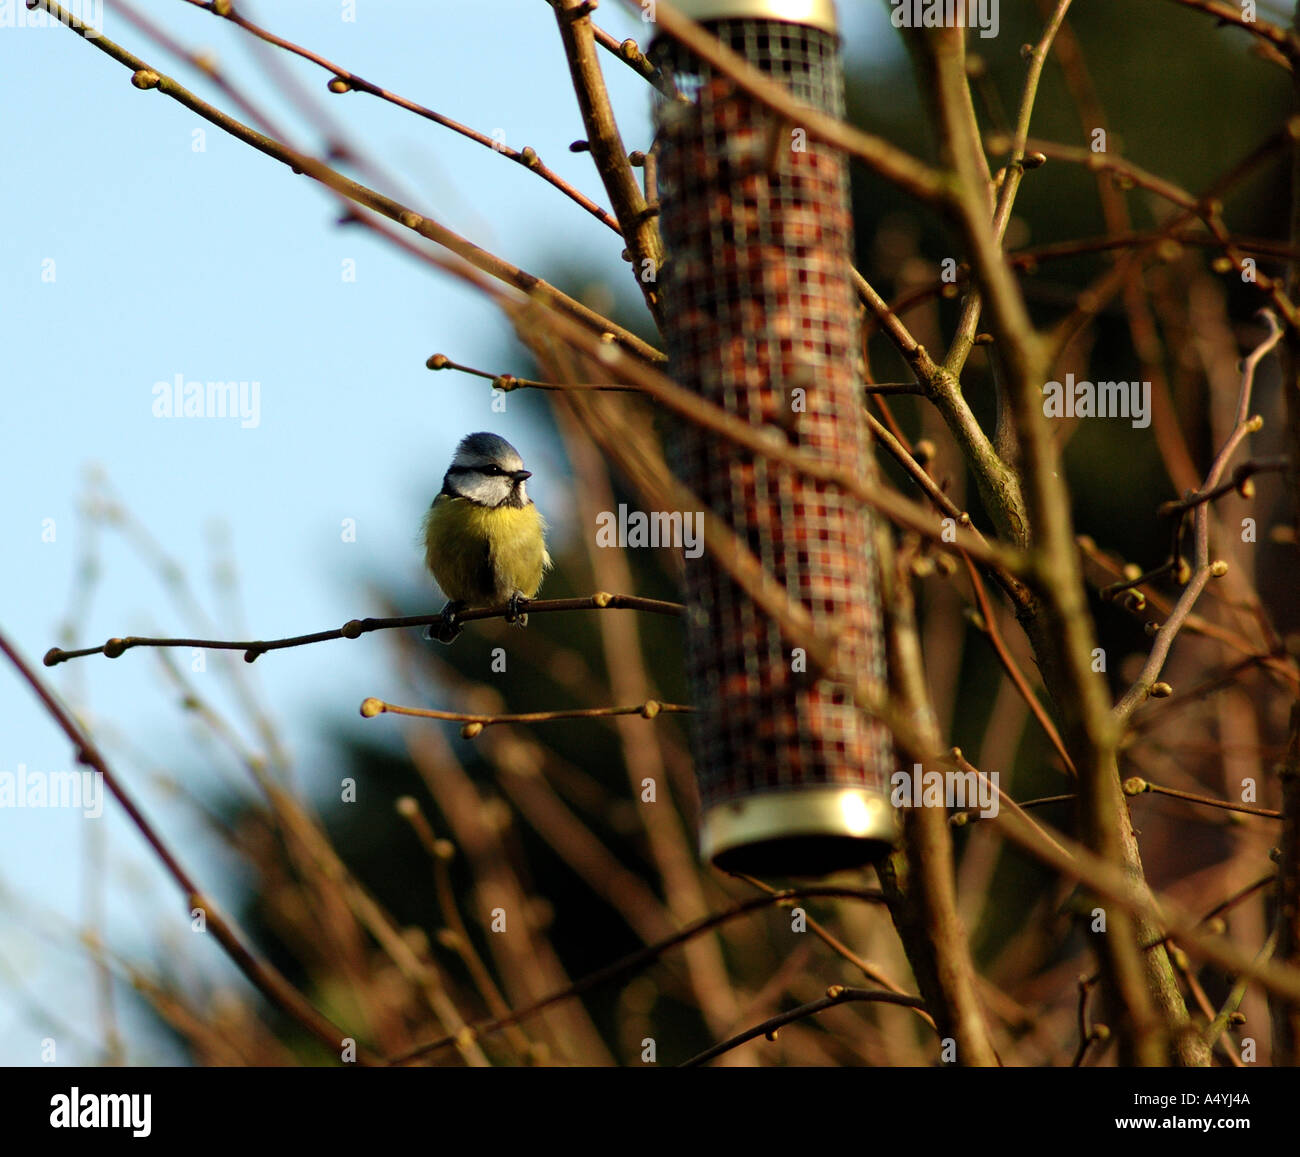 British blue tit in the countryside feeding on the nuts Stock Photo